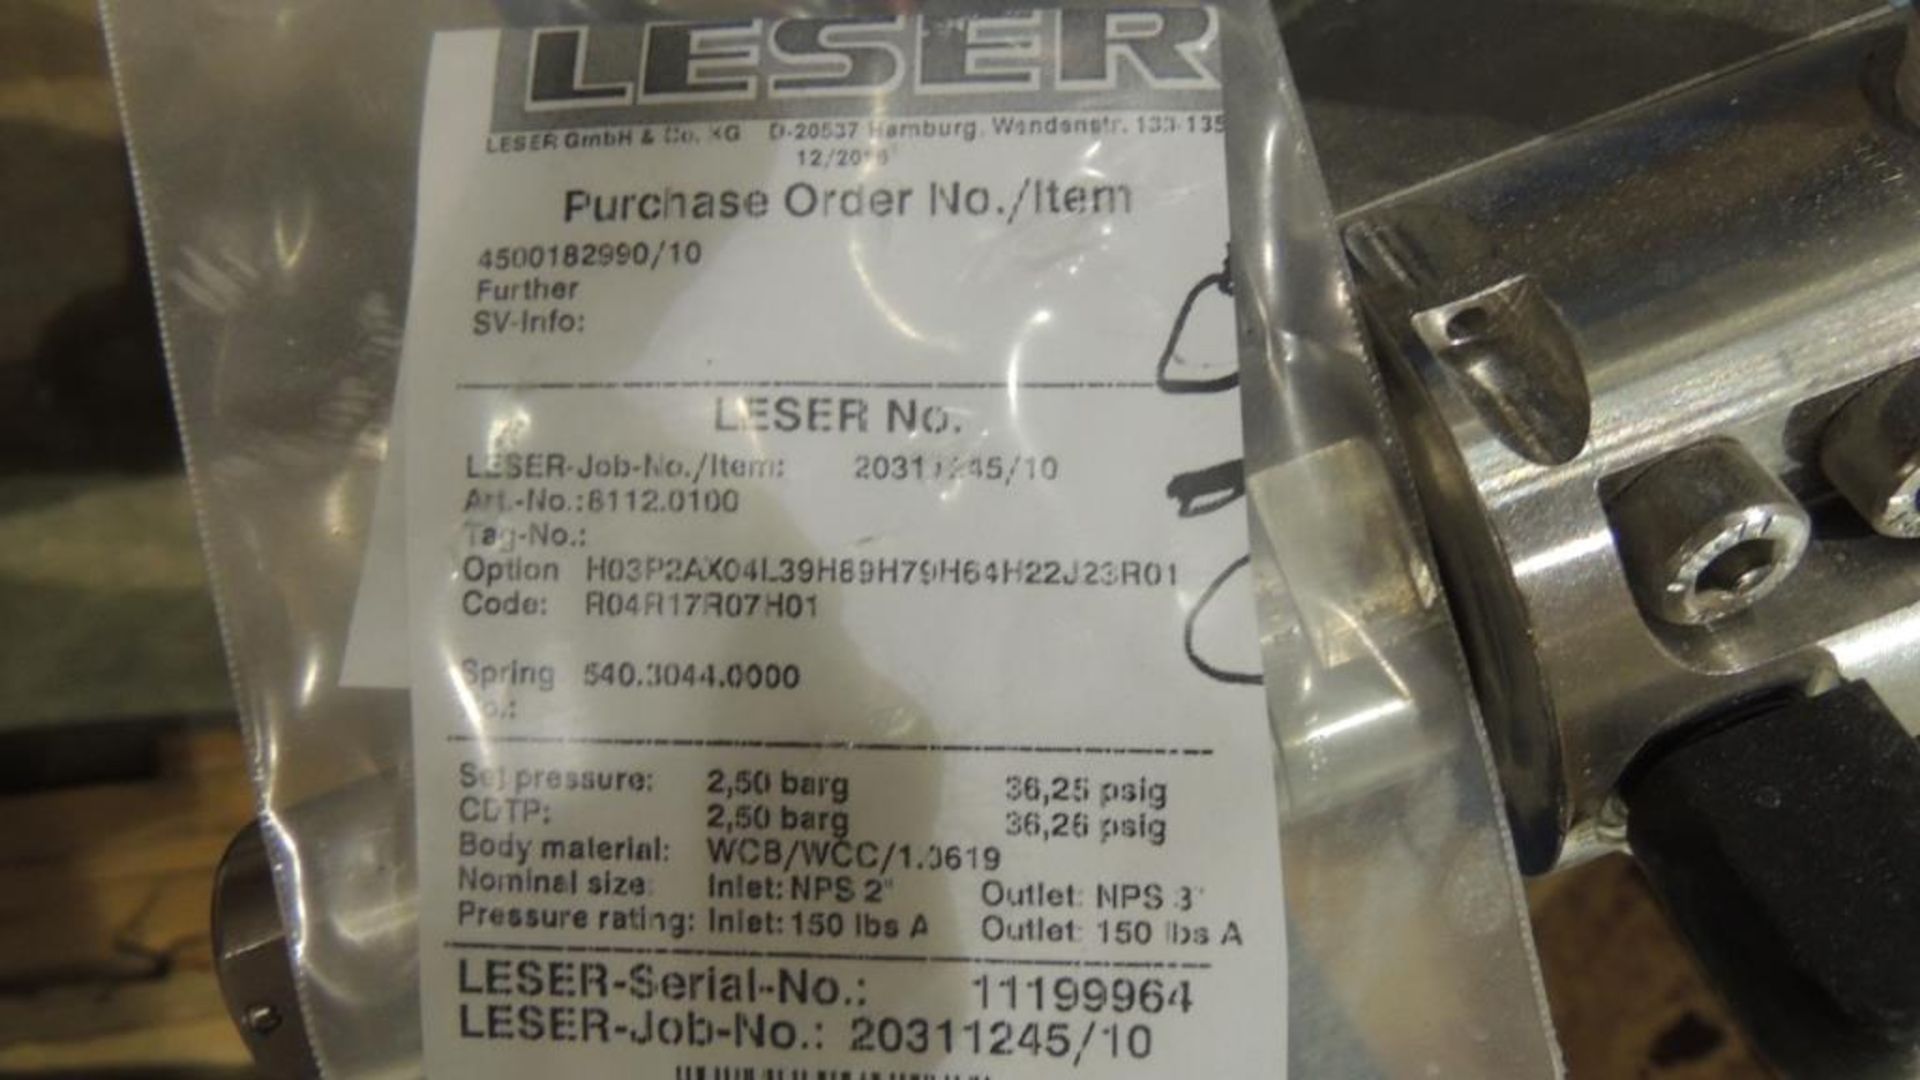 Large Quantity of Leser Relief and Safety Valves, plus Spare Parts Kits - Image 64 of 374